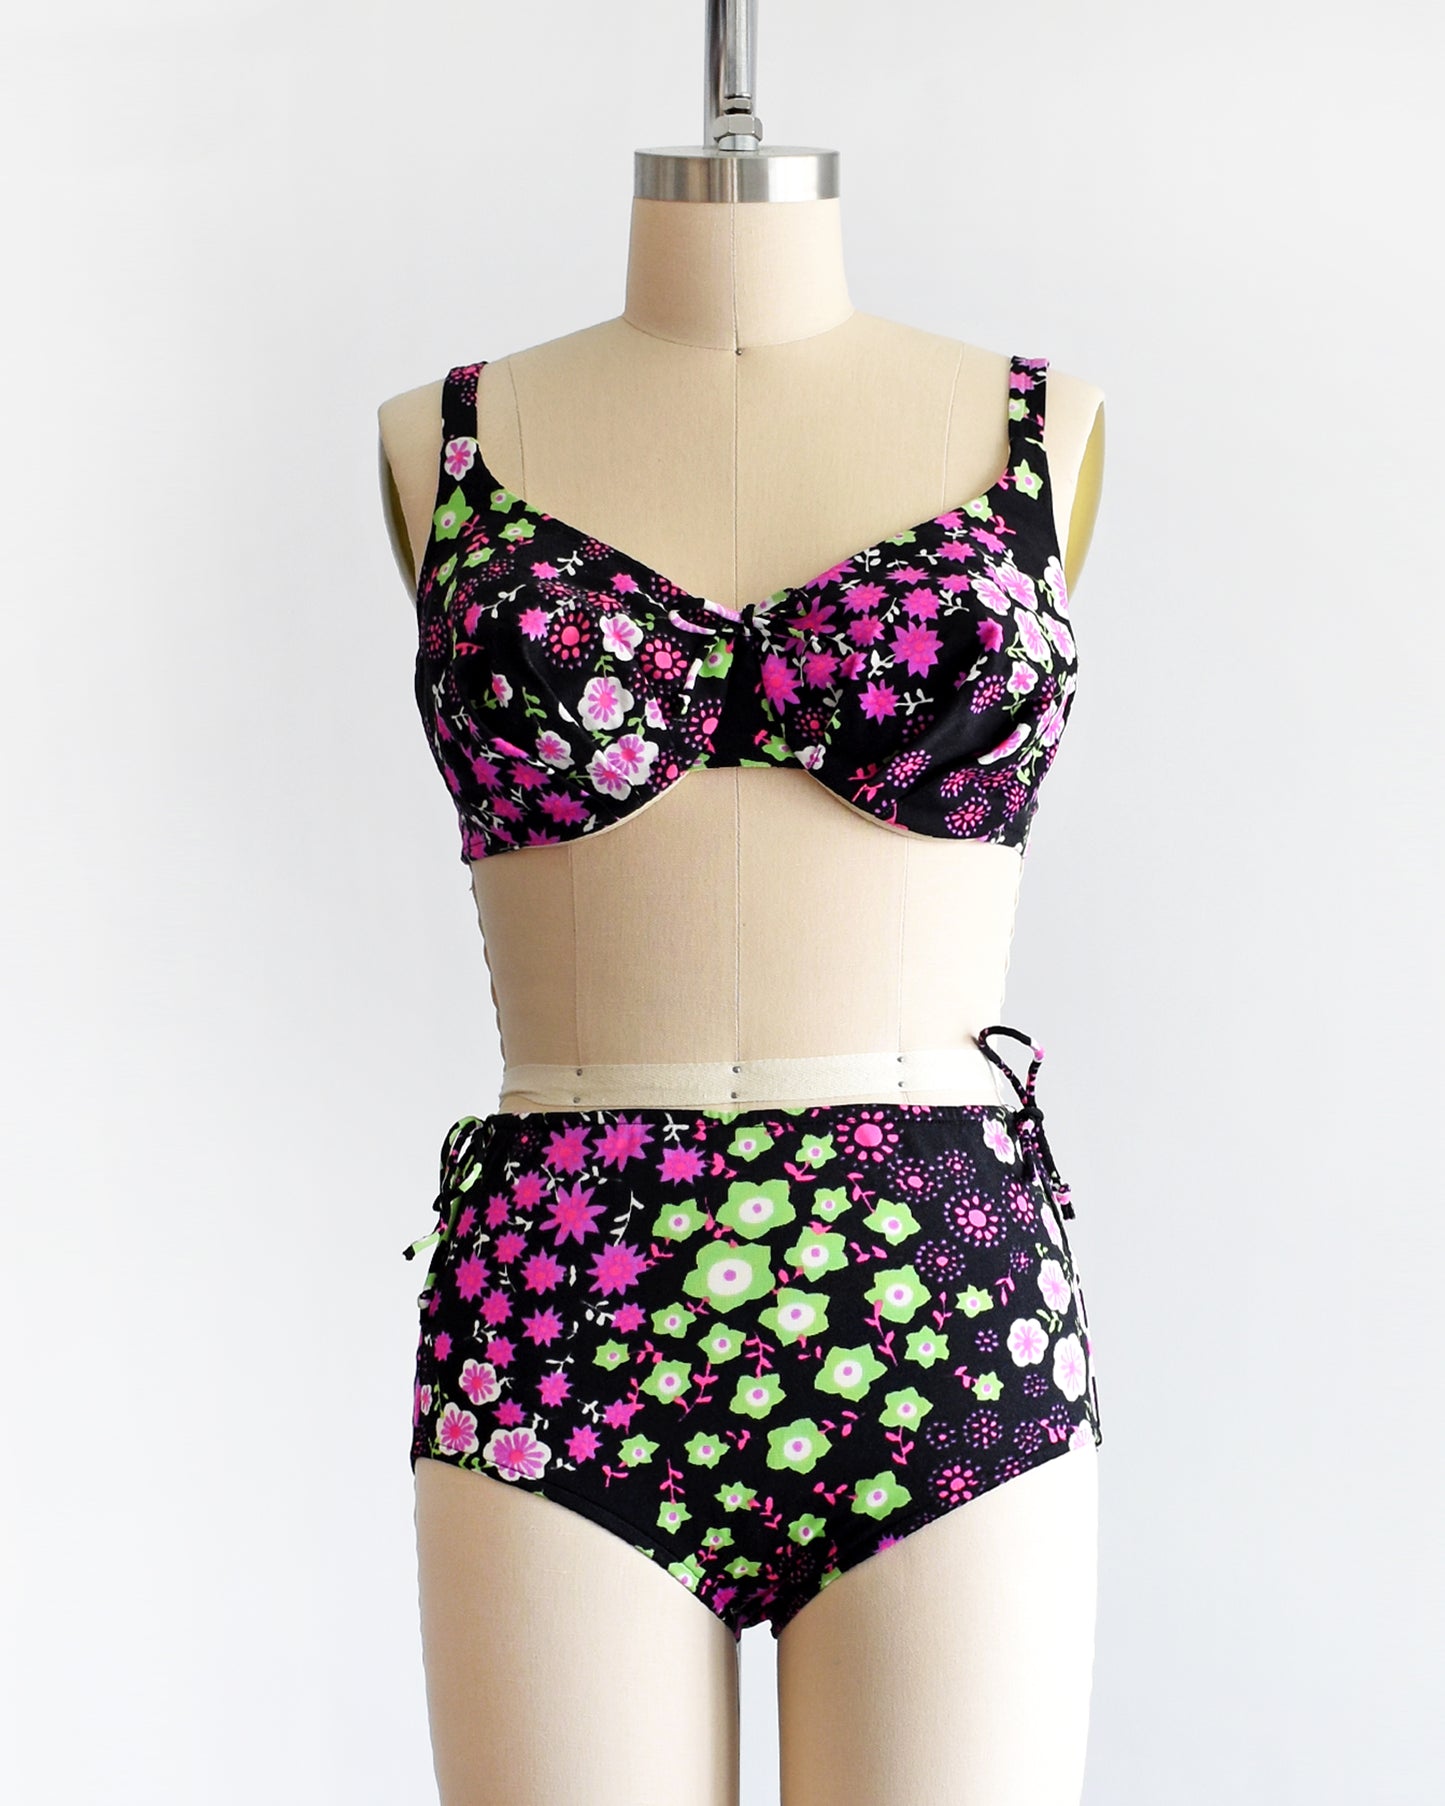 a vintage 1960s two piece bikini set that is black and has a bright pink, purple, green, and white flower power print on a dress form.